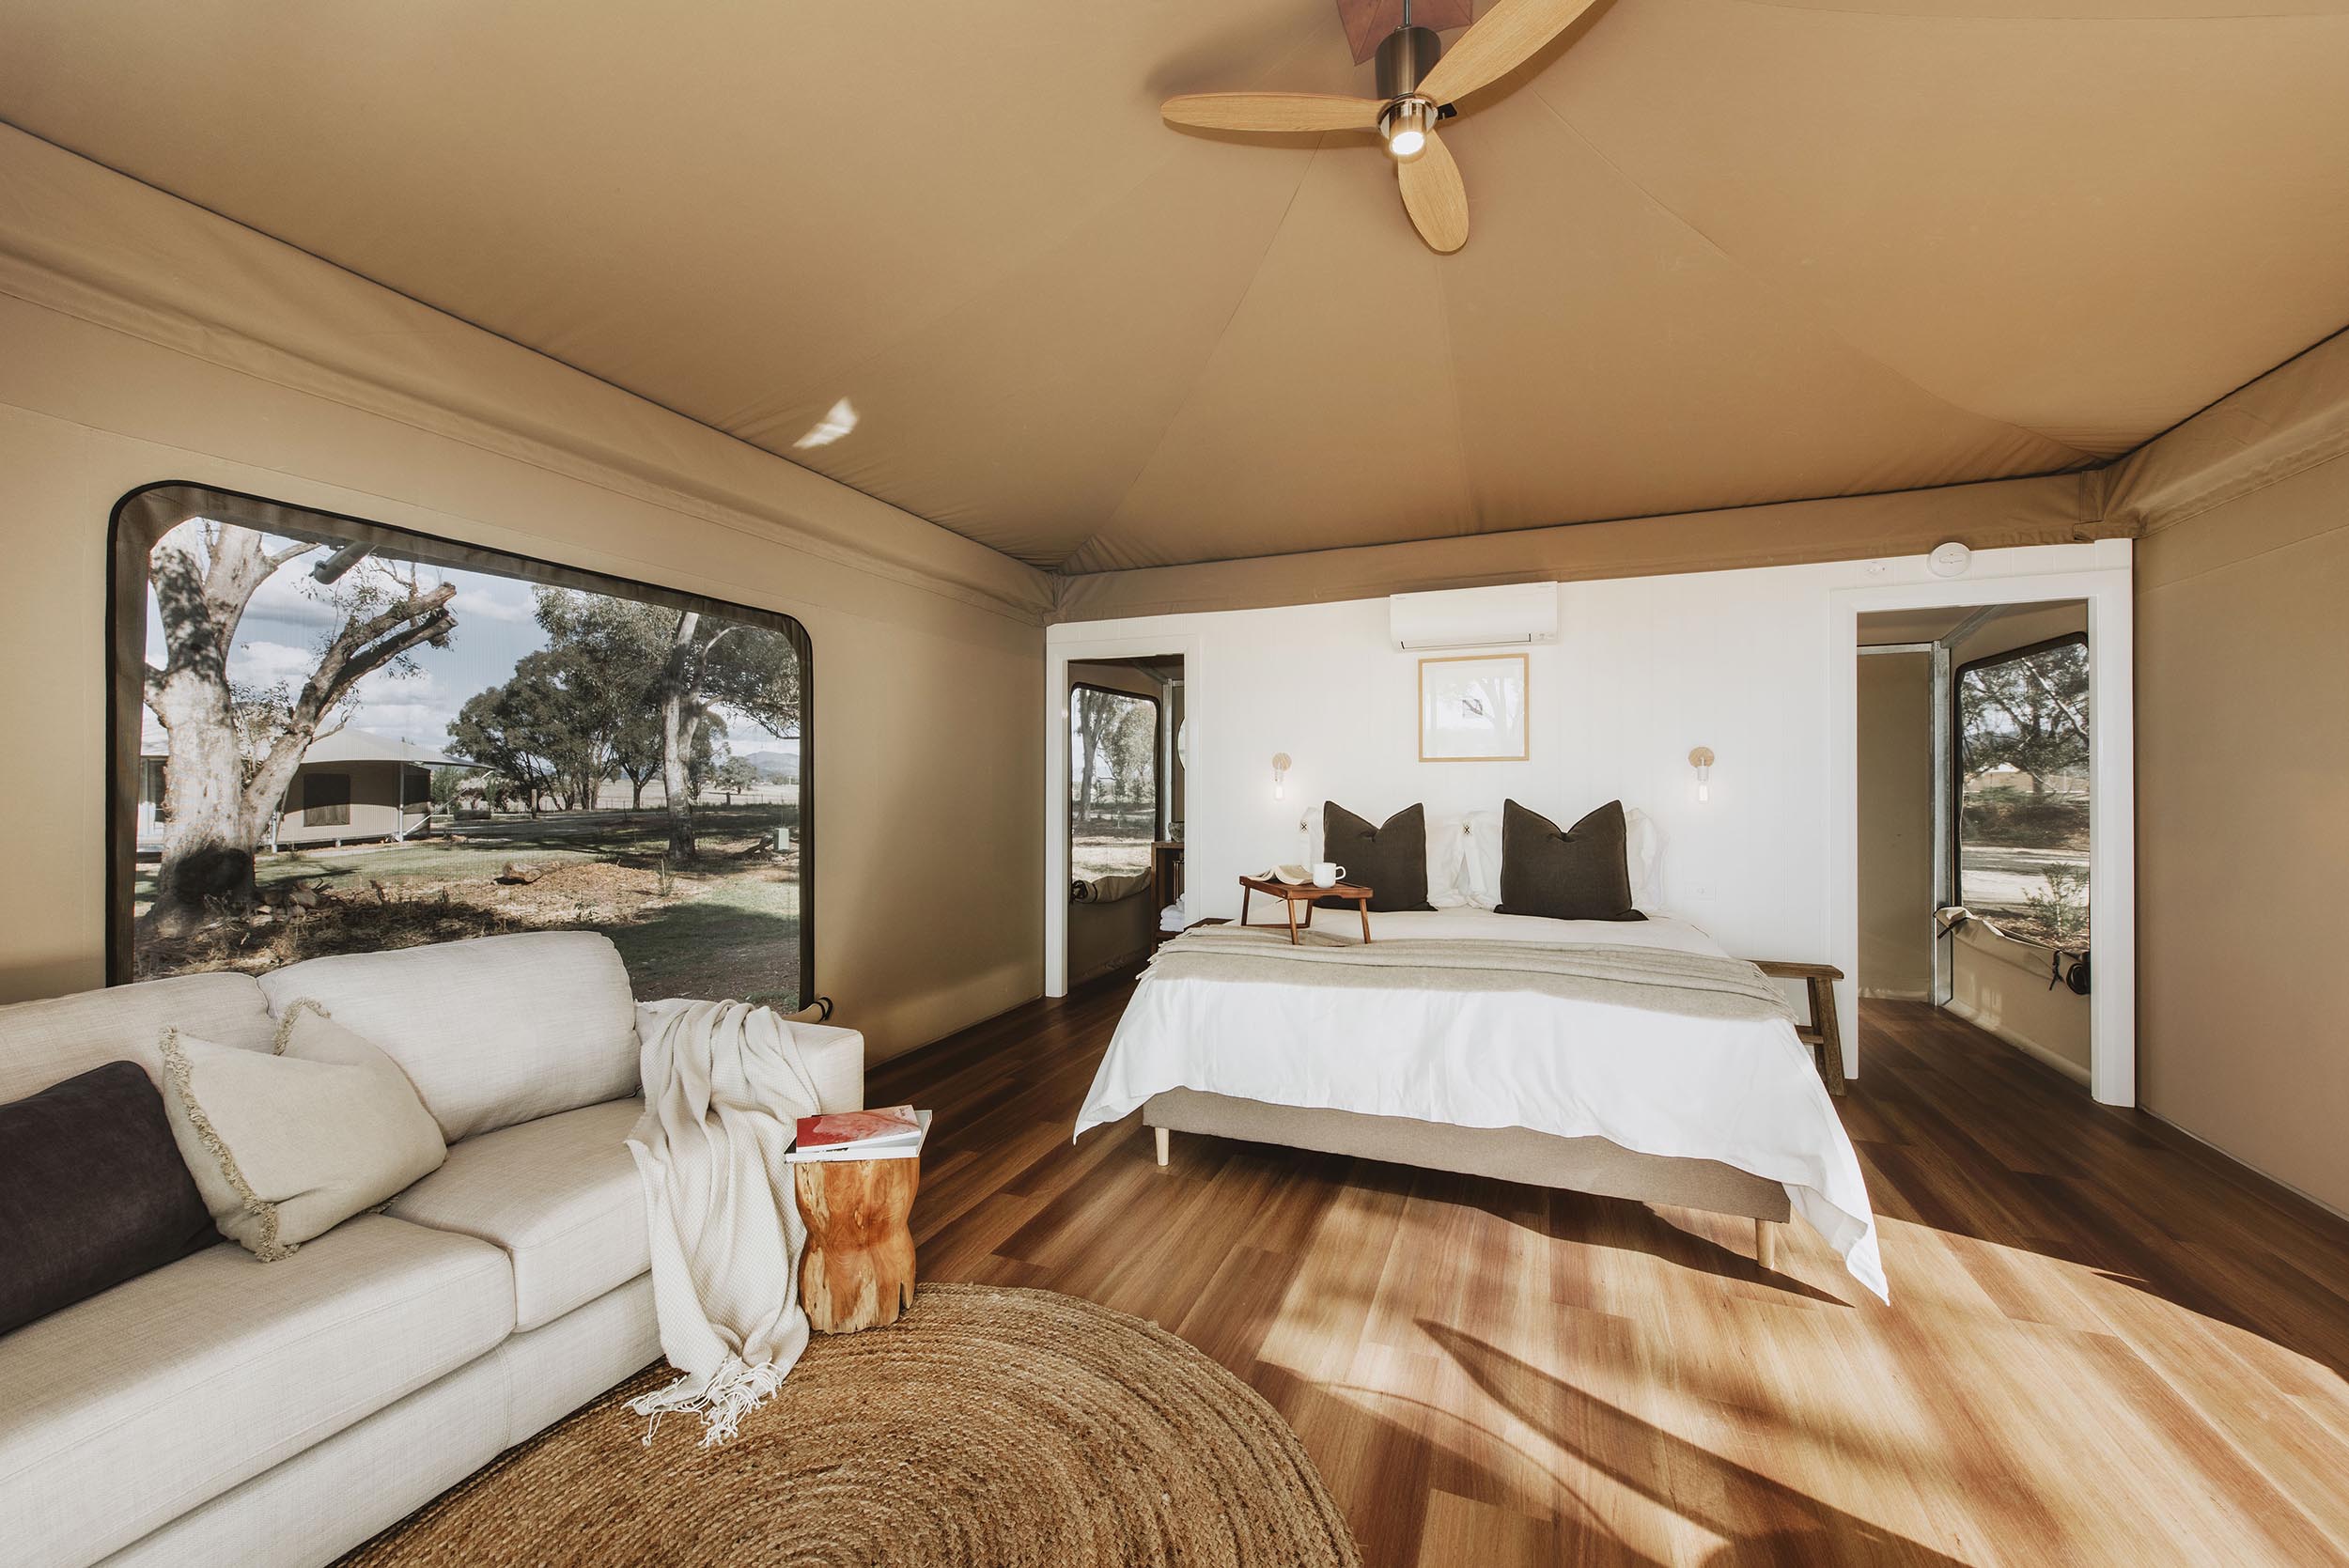 Luxury eco-glamping accommodation in Mudgee romantic getaway